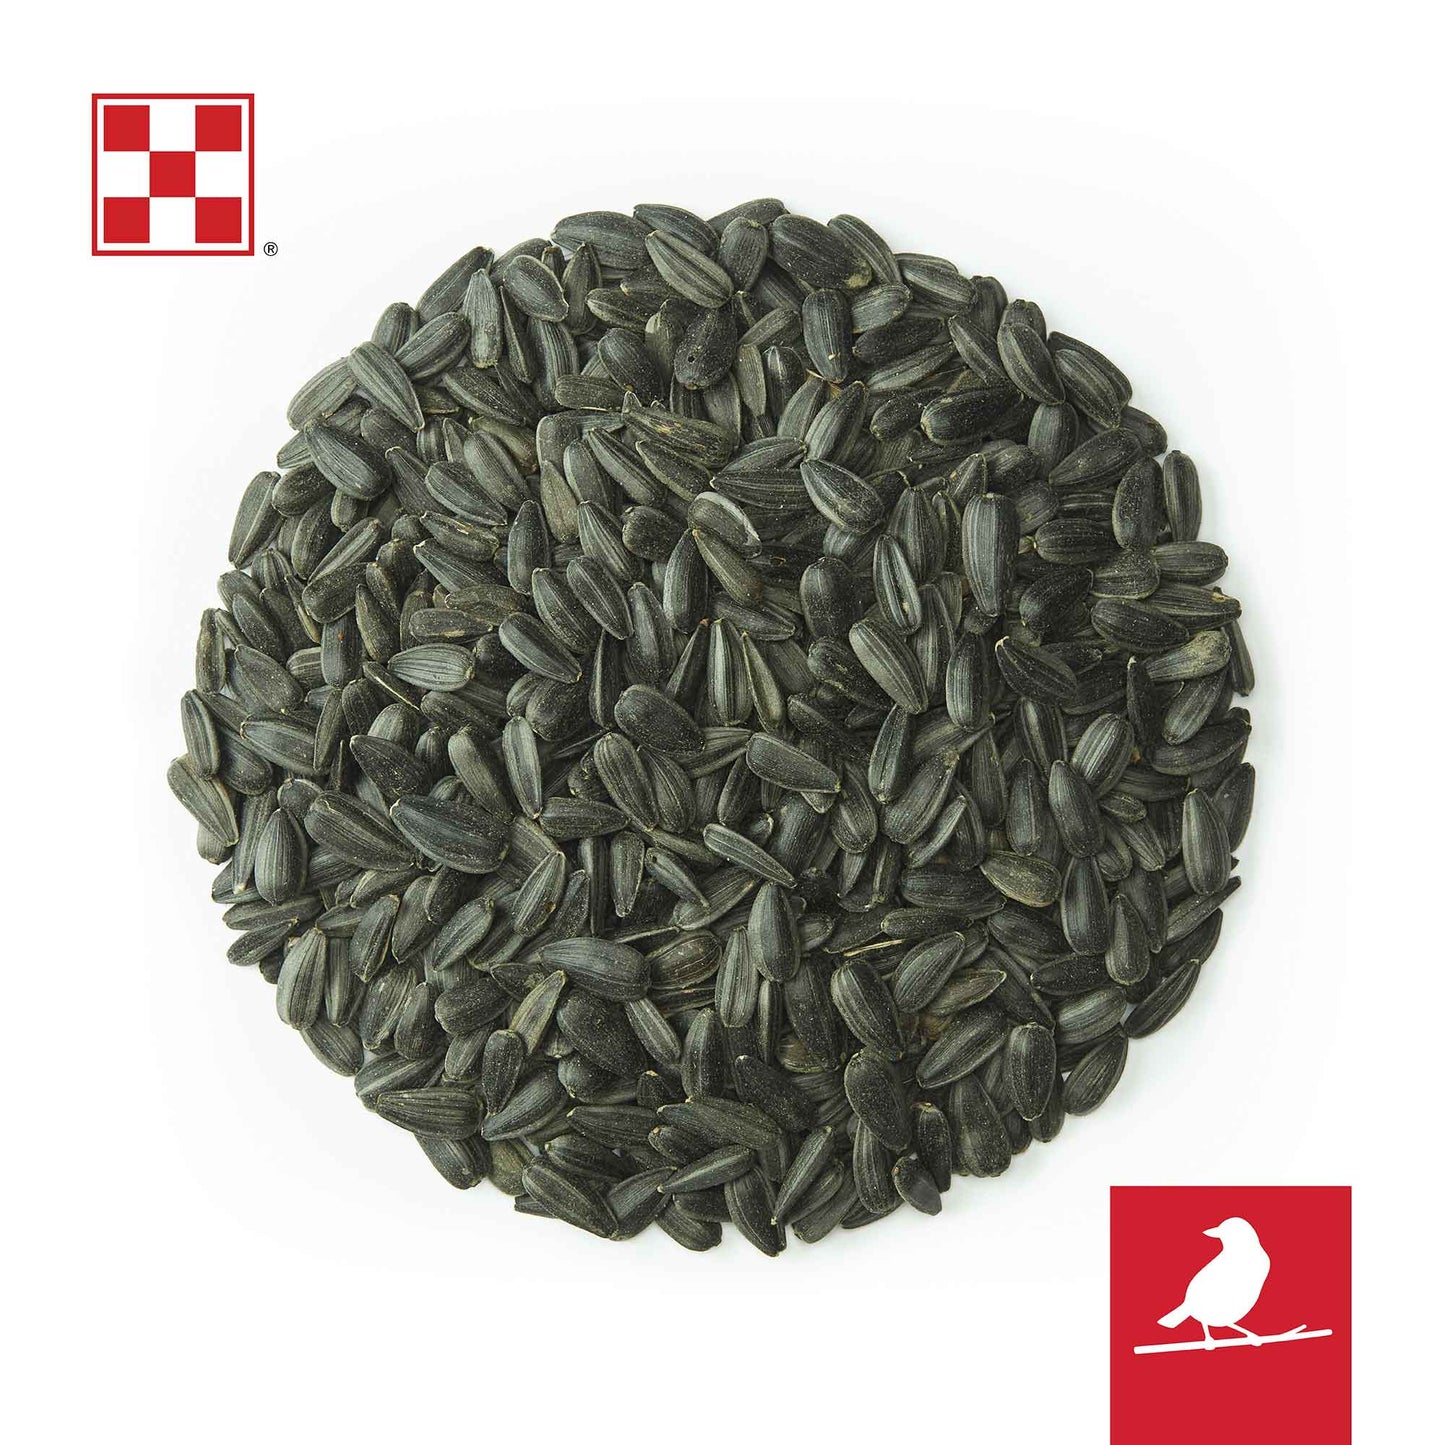 Black sunflower seeds in a circle